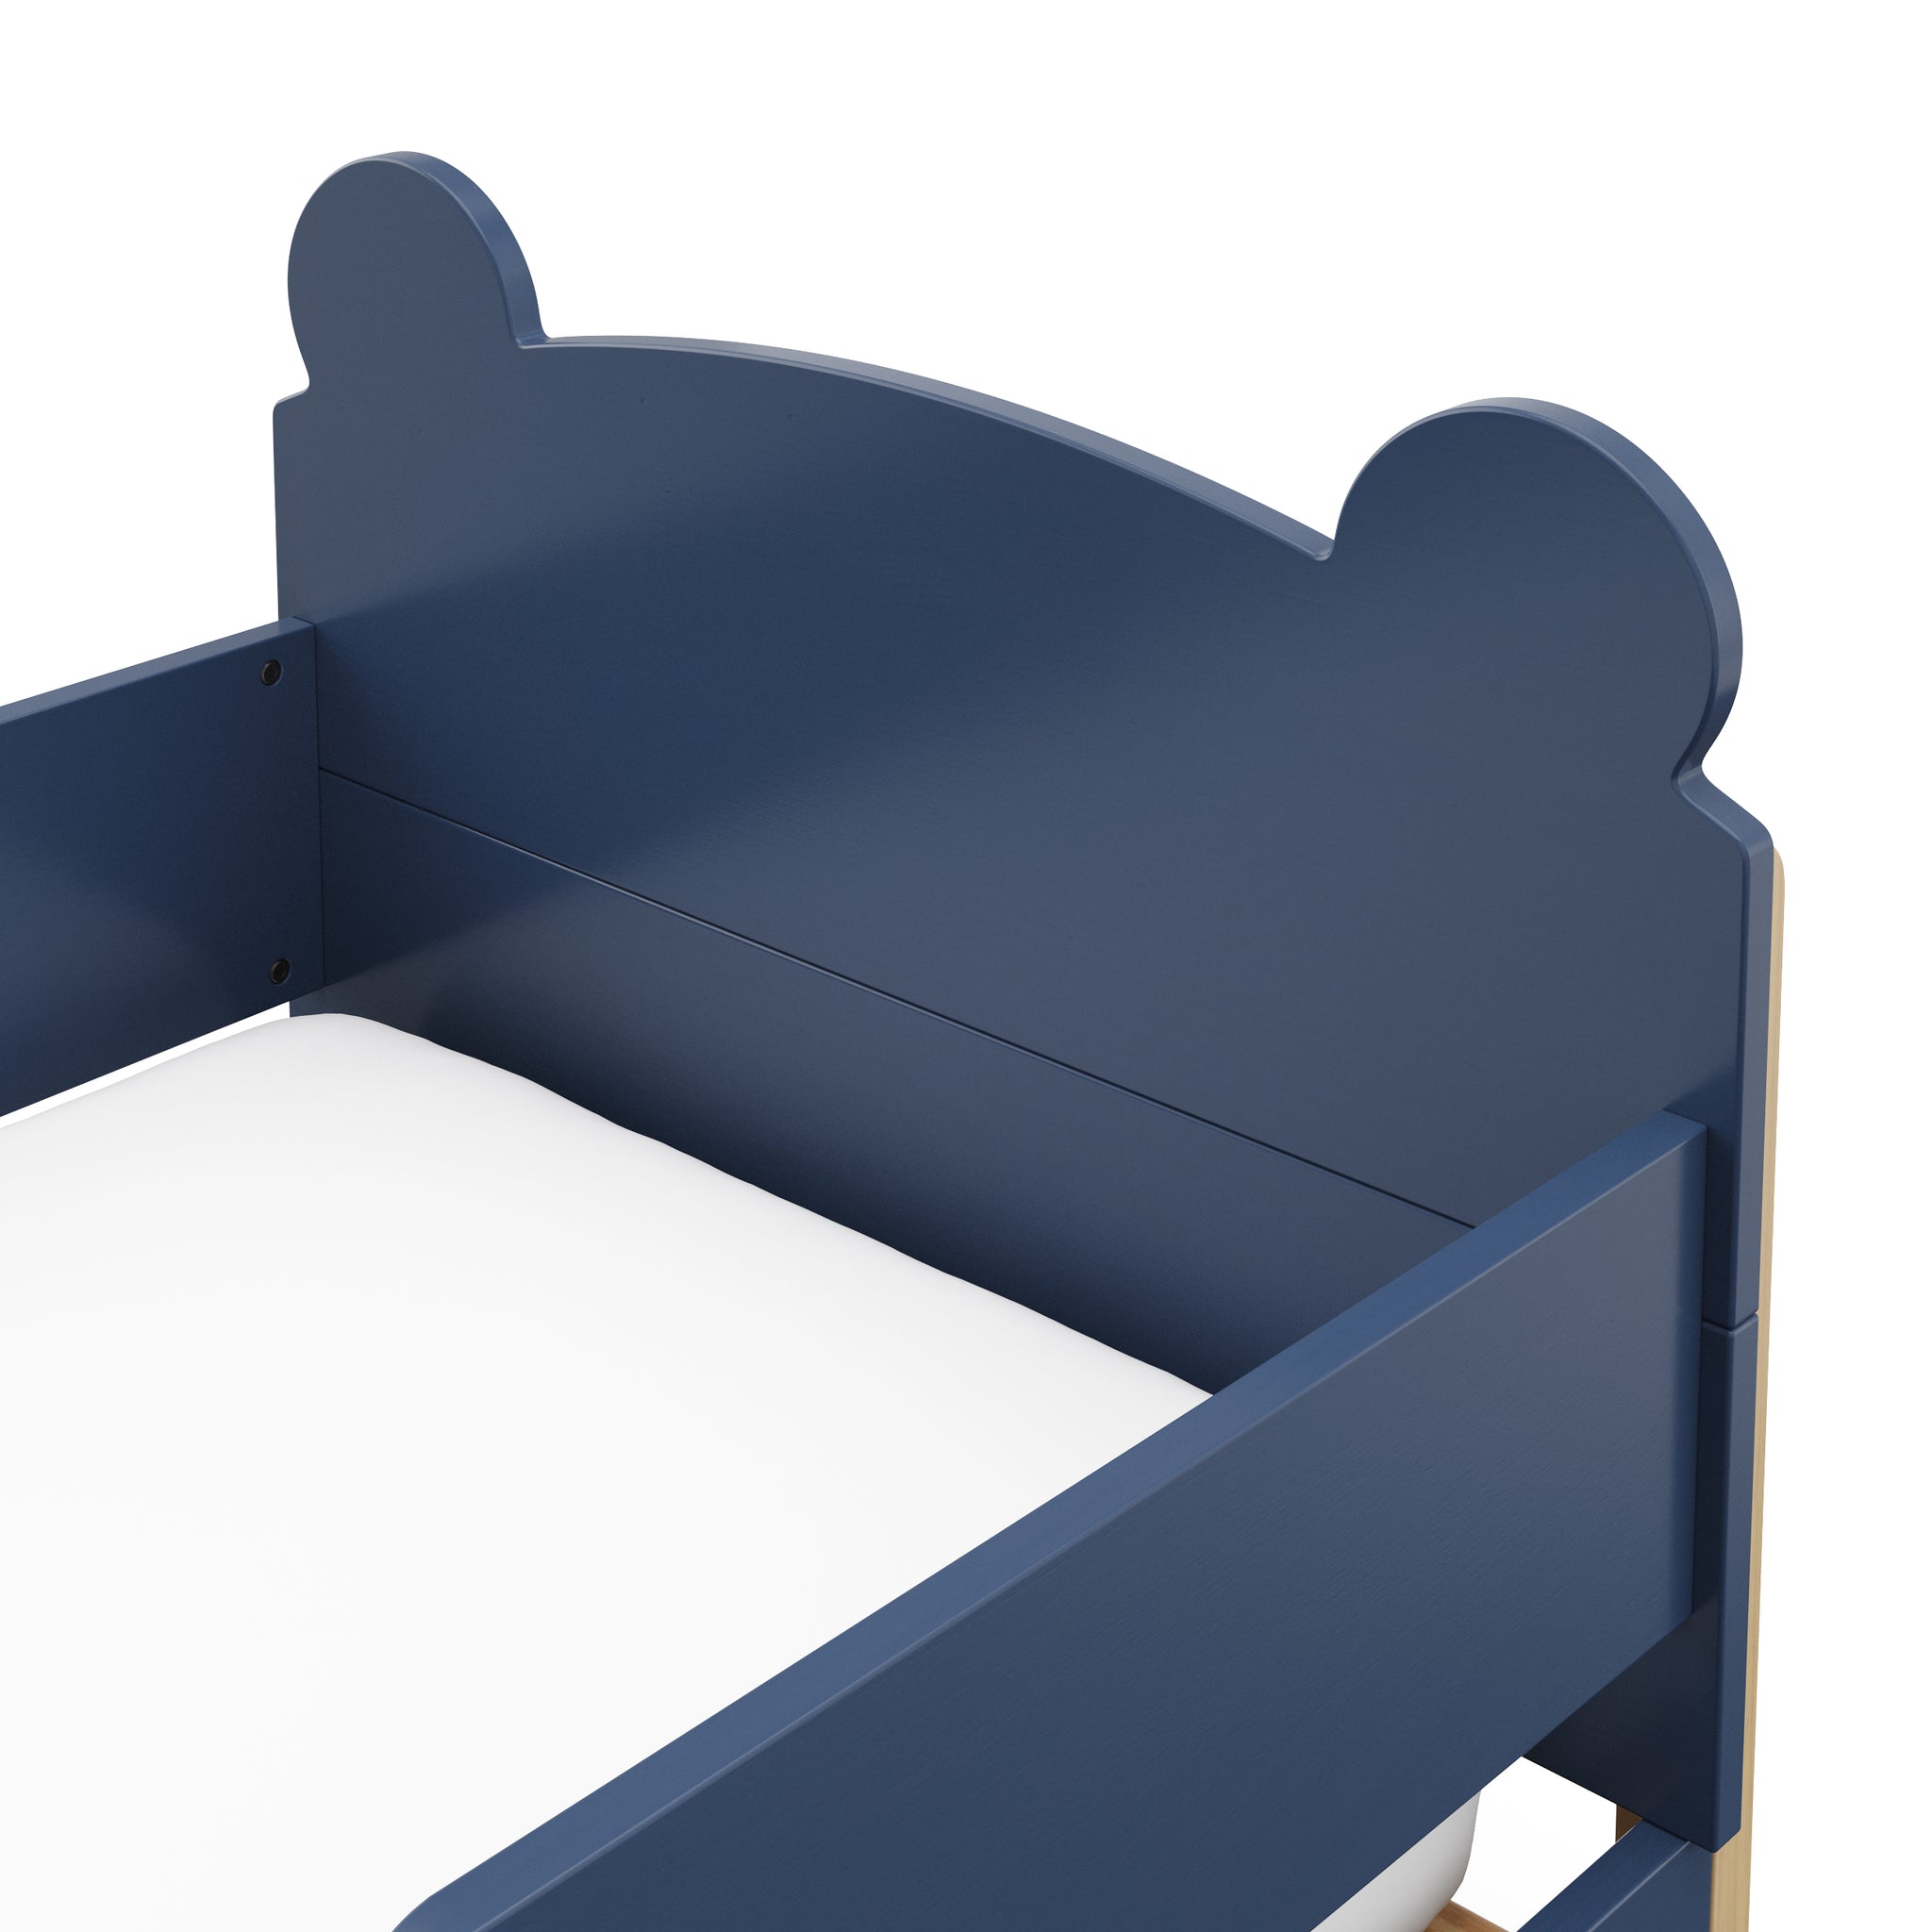 close up view of a blue-colored toddler bed